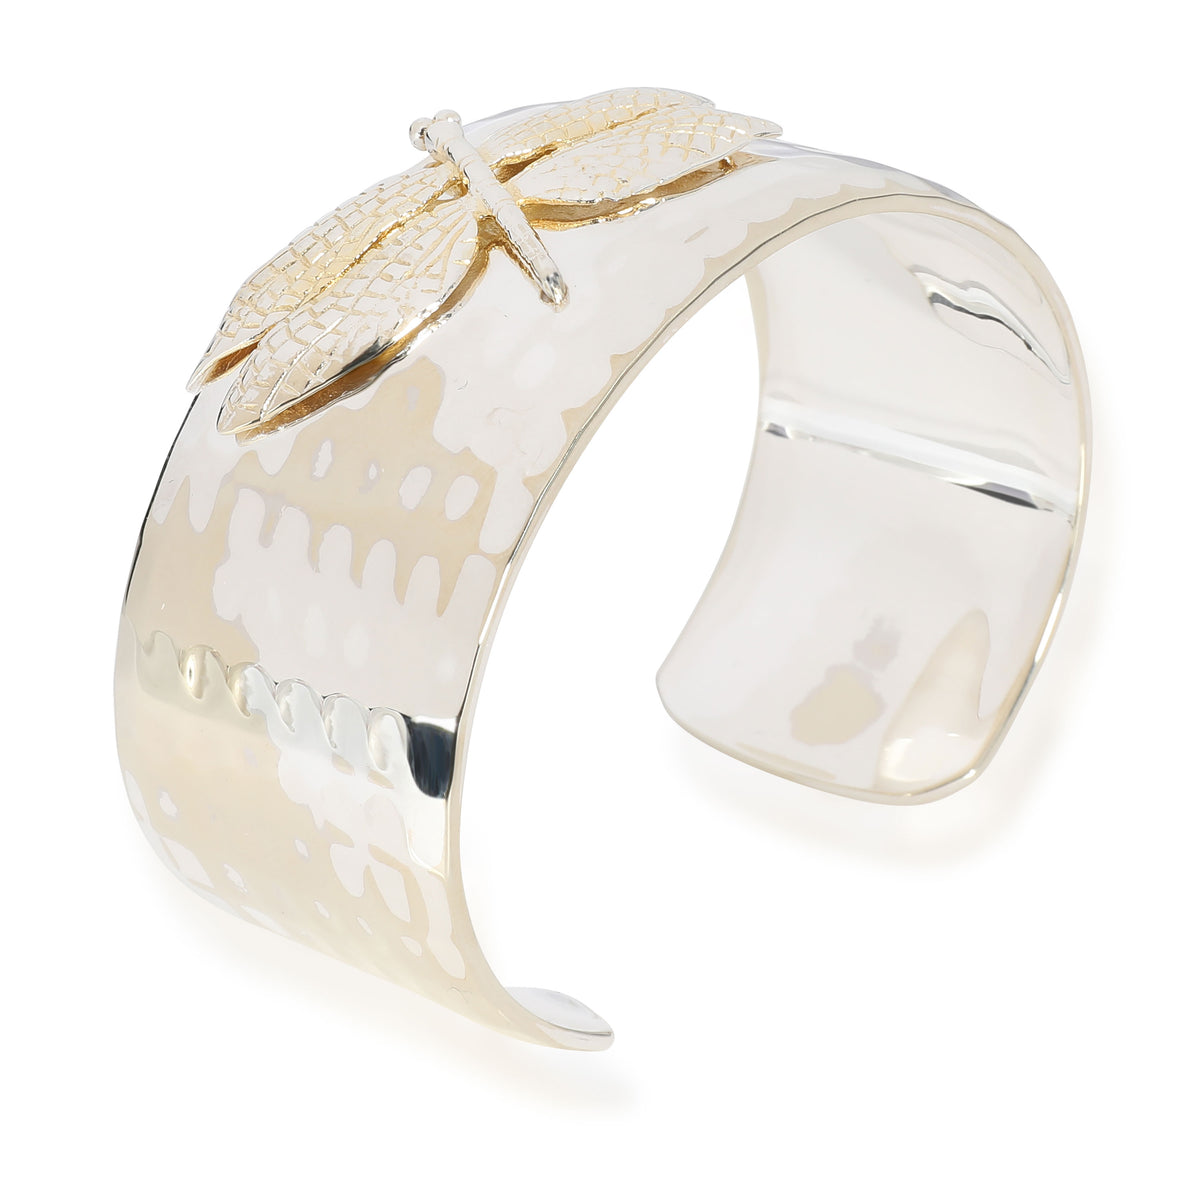 Tiffany & Co. Dragonfly Cuff in 18K Yellow Gold/Sterling Silver